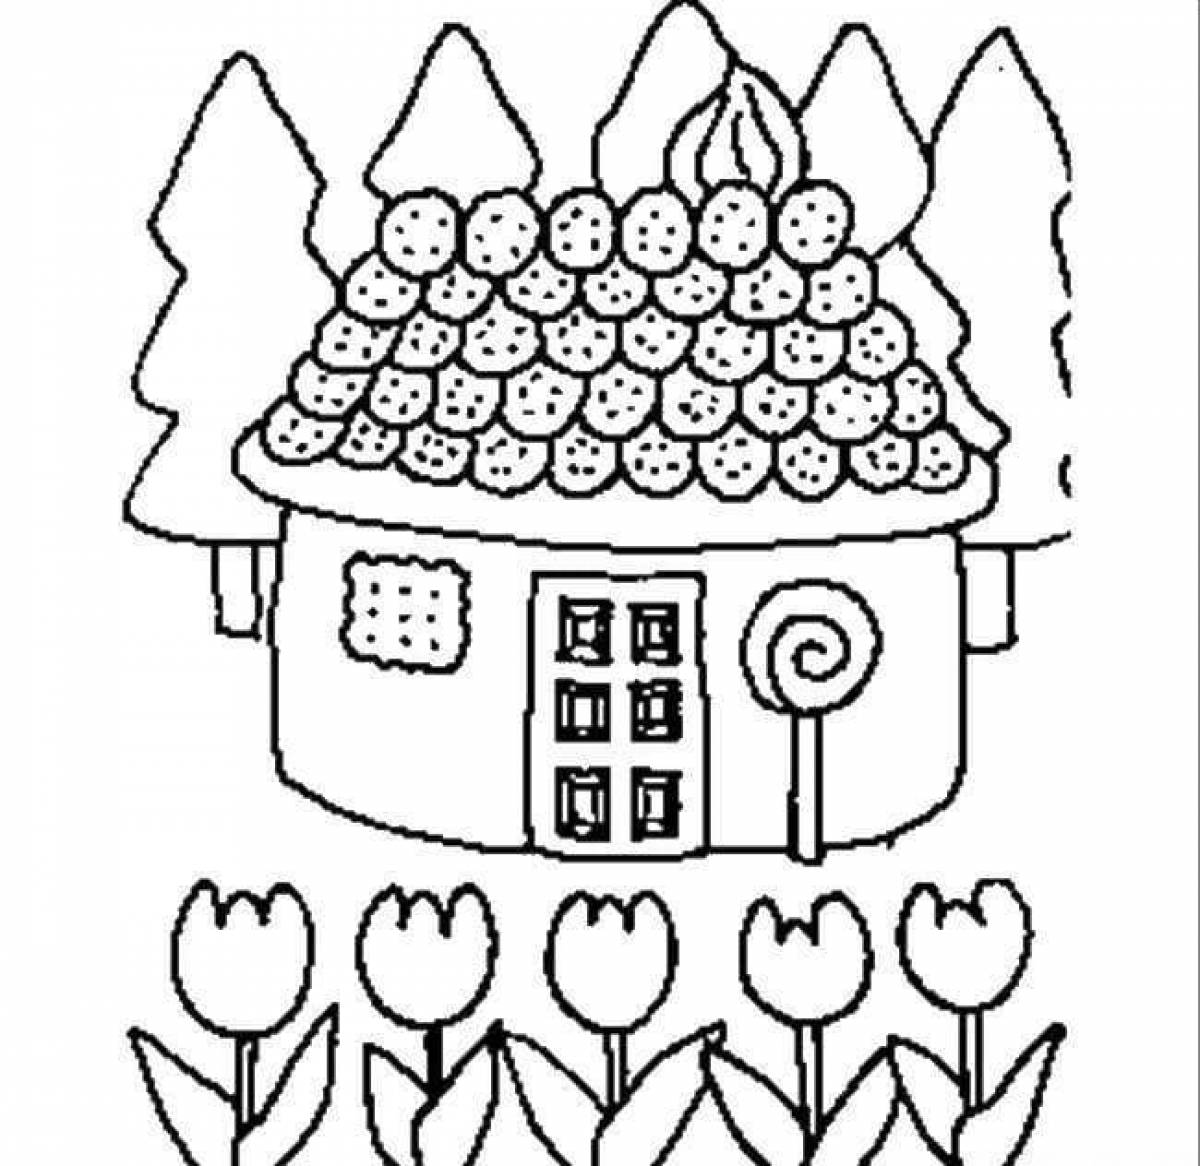 Fun coloring pages for 5-6 year olds